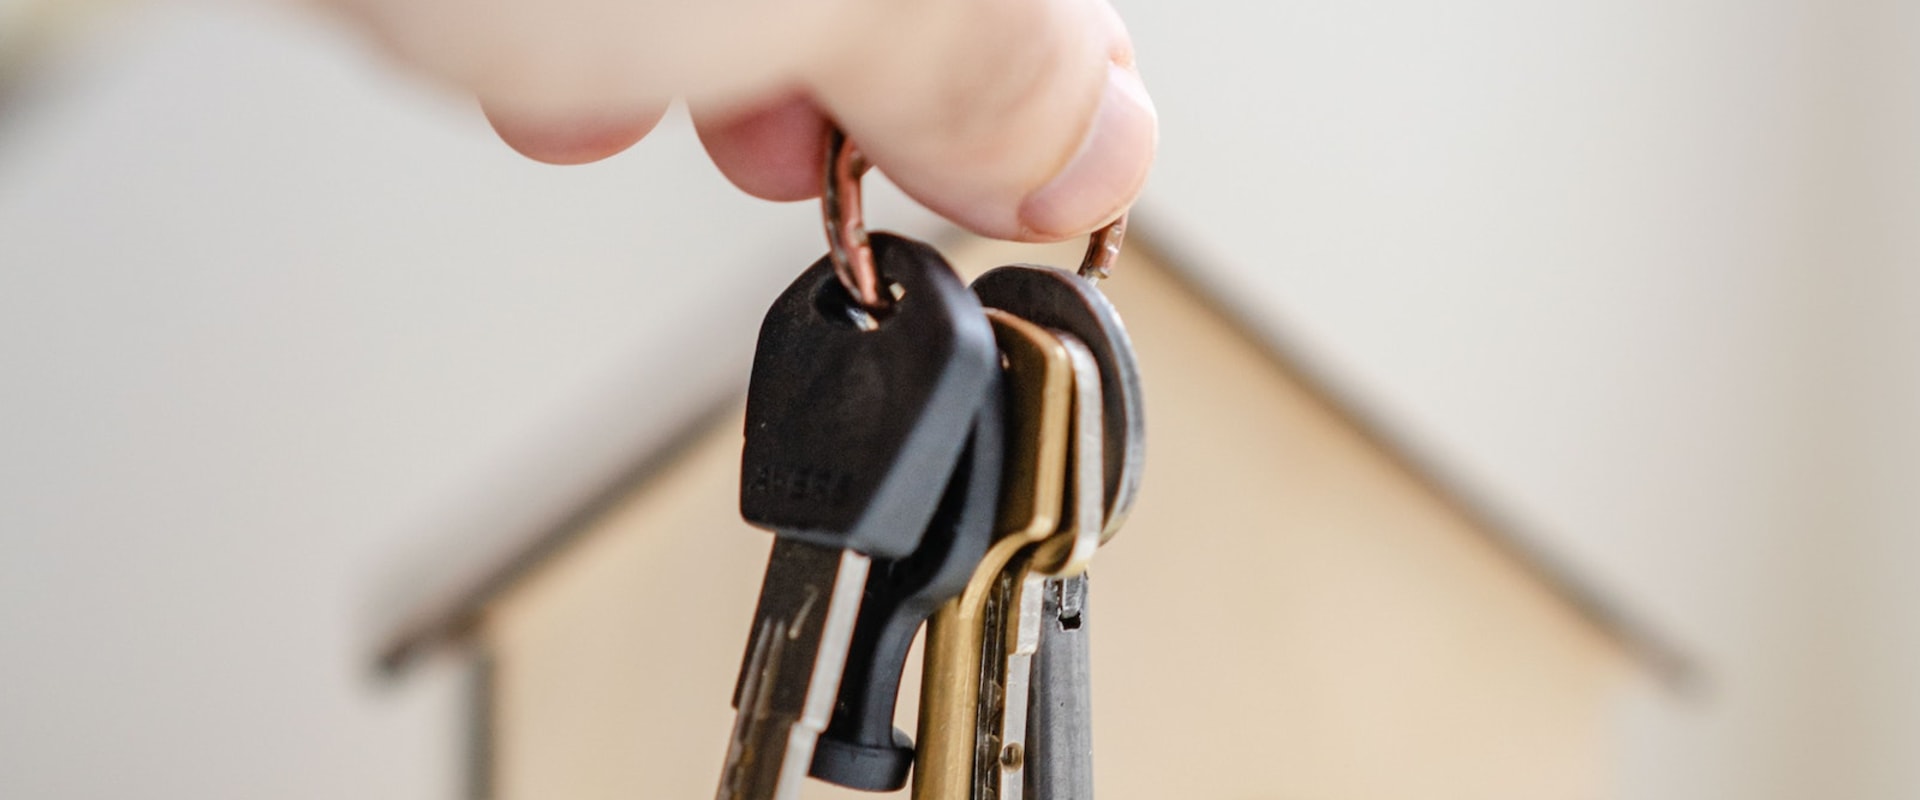 Upgrading Your Home Security With Modern Locks And Keys In Tupelo, MS